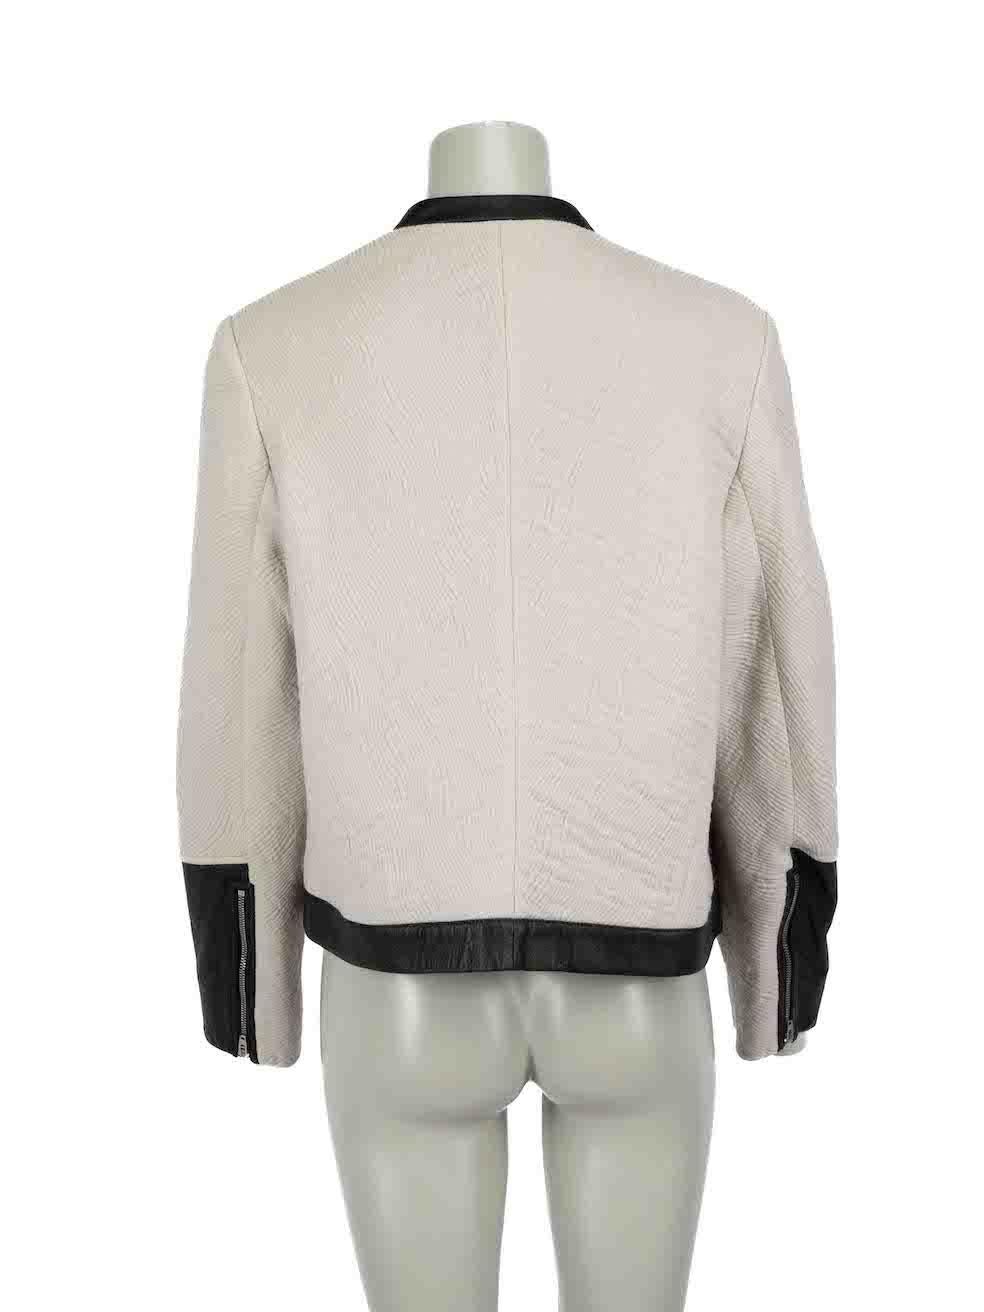 Helmut Lang Grey Wool Leather Panelling Jacket Size L In Good Condition For Sale In London, GB